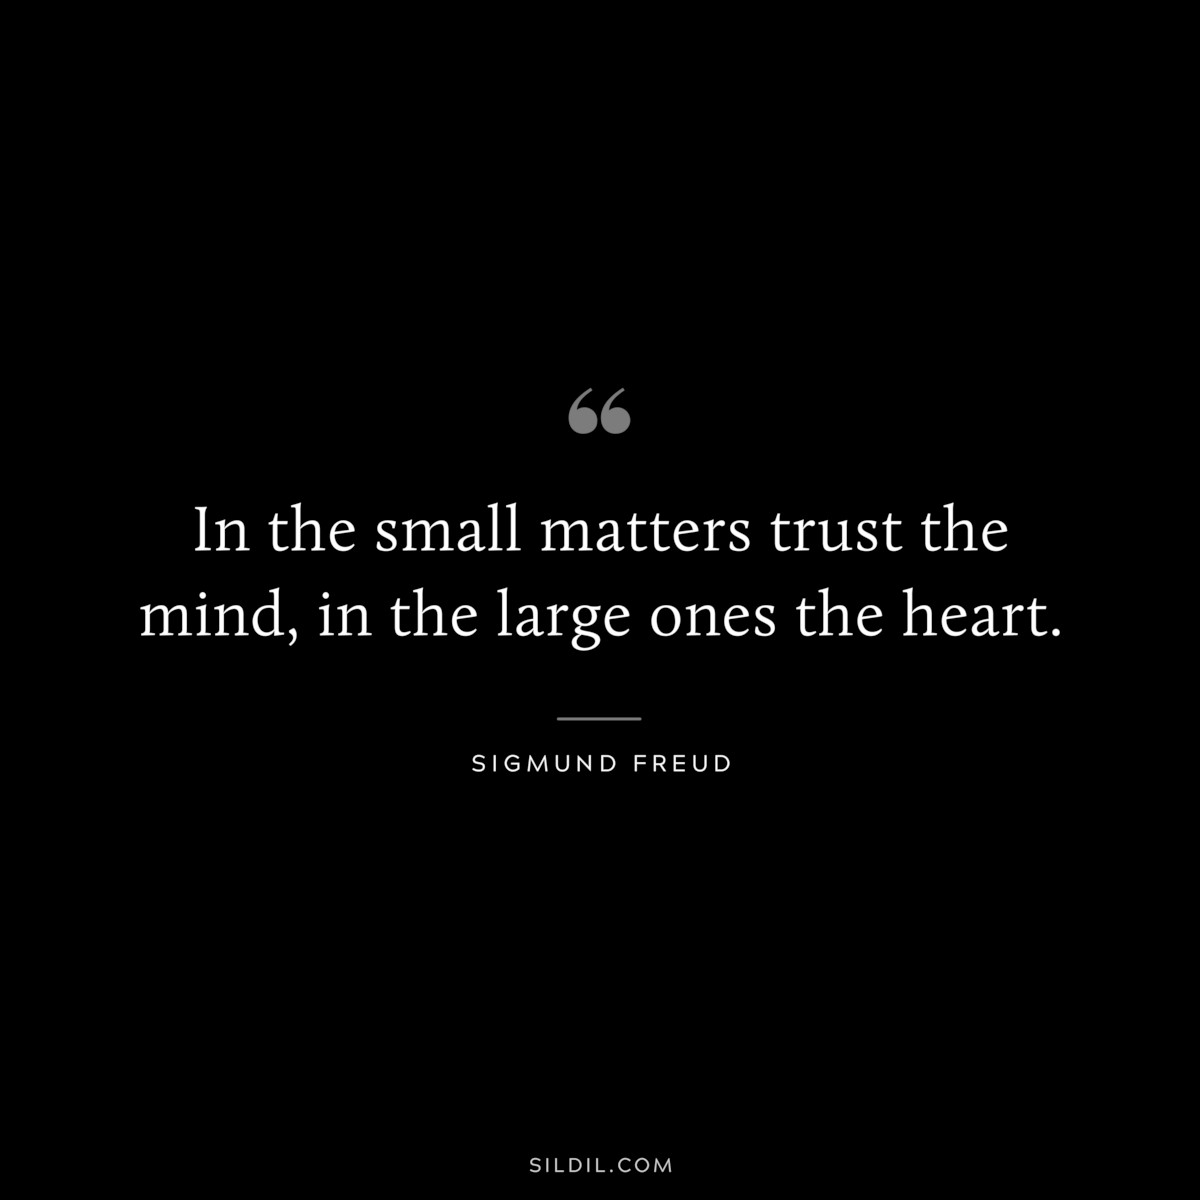 In the small matters trust the mind, in the large ones the heart. ― Sigmund Frued